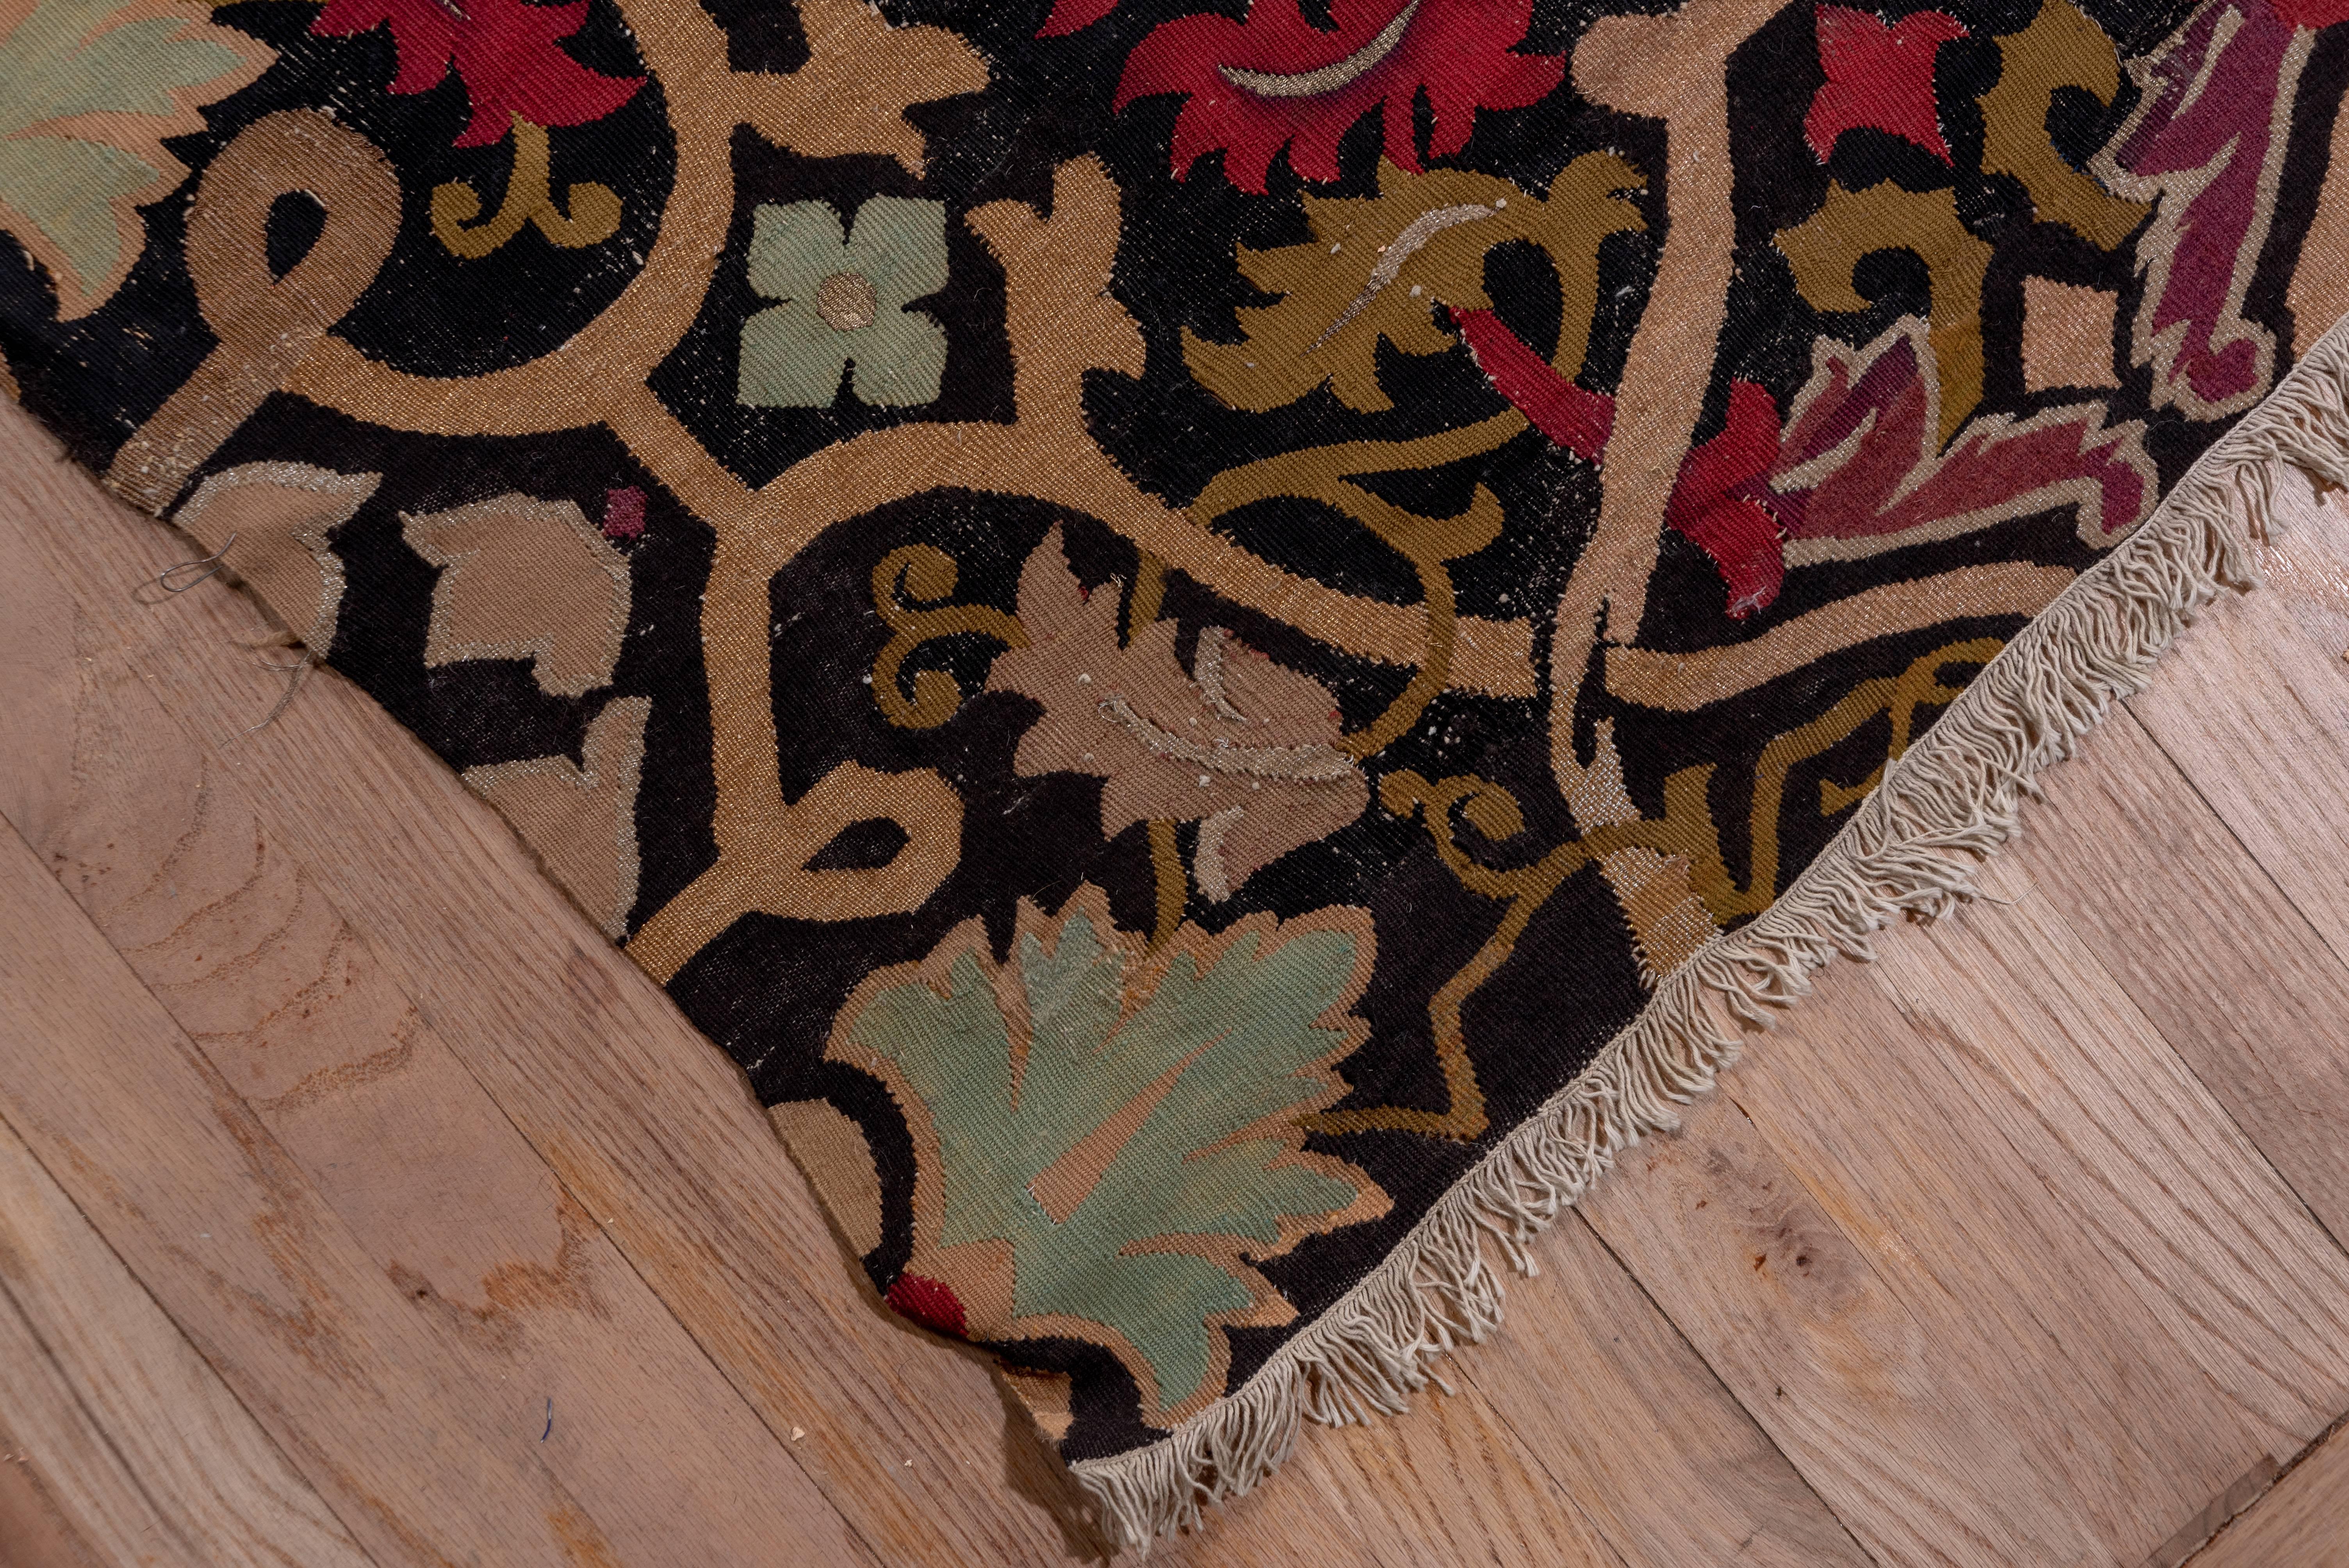 This border-less, black ground tapestry woven French pile-less carpet shows and allover pattern of rosette cruciforms, penetrating strap work vinery and a variety of acanthus leaves. There are accents in gold and silver tone metal thread as well as